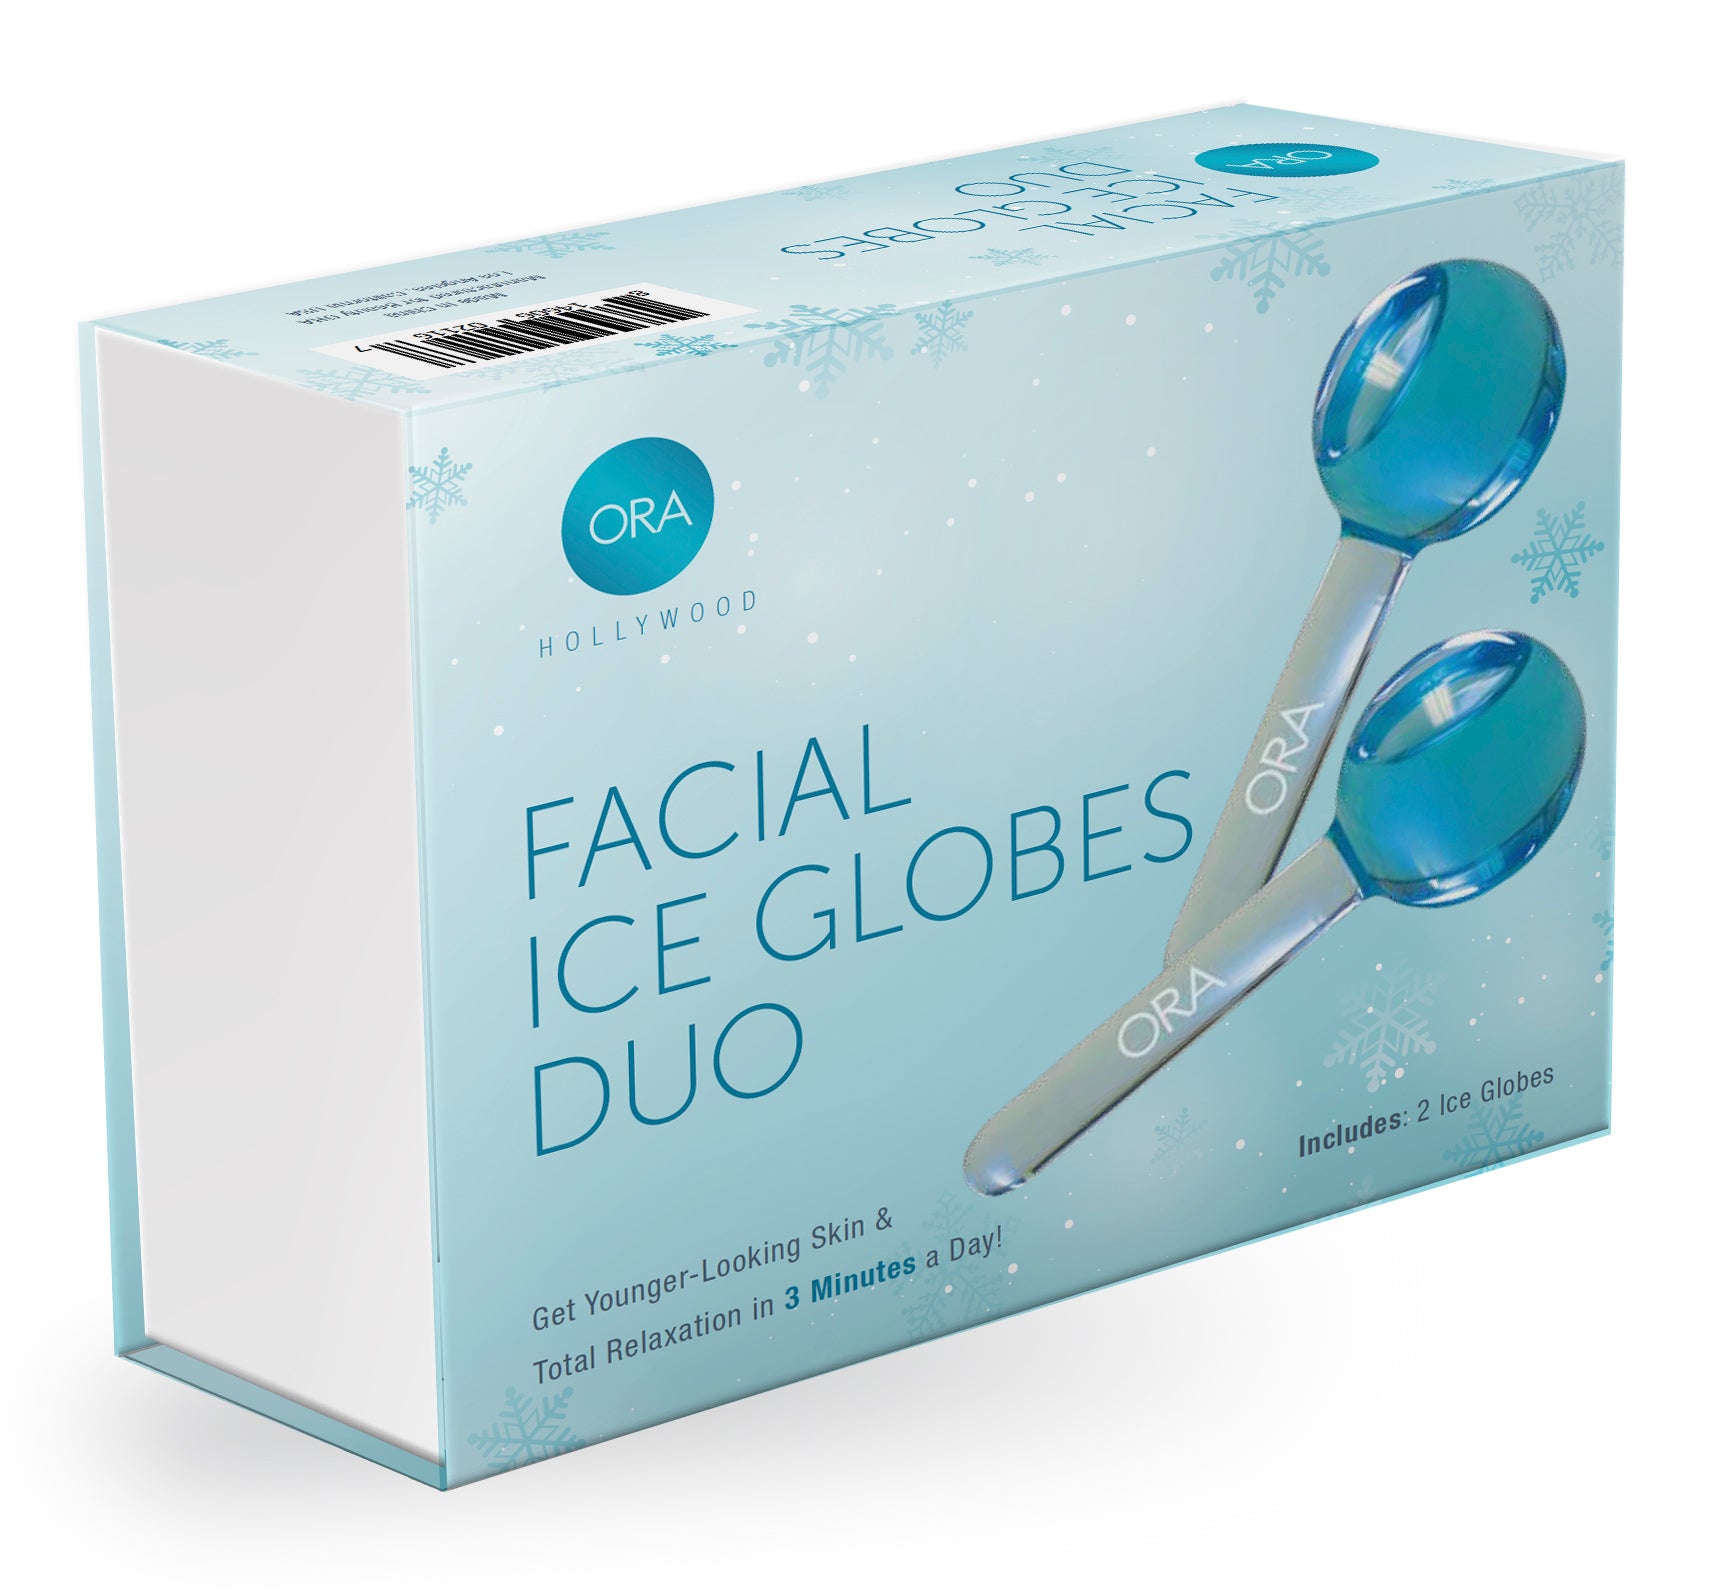 ORA Facial Cooling Ice Globes (Two-Piece Set)